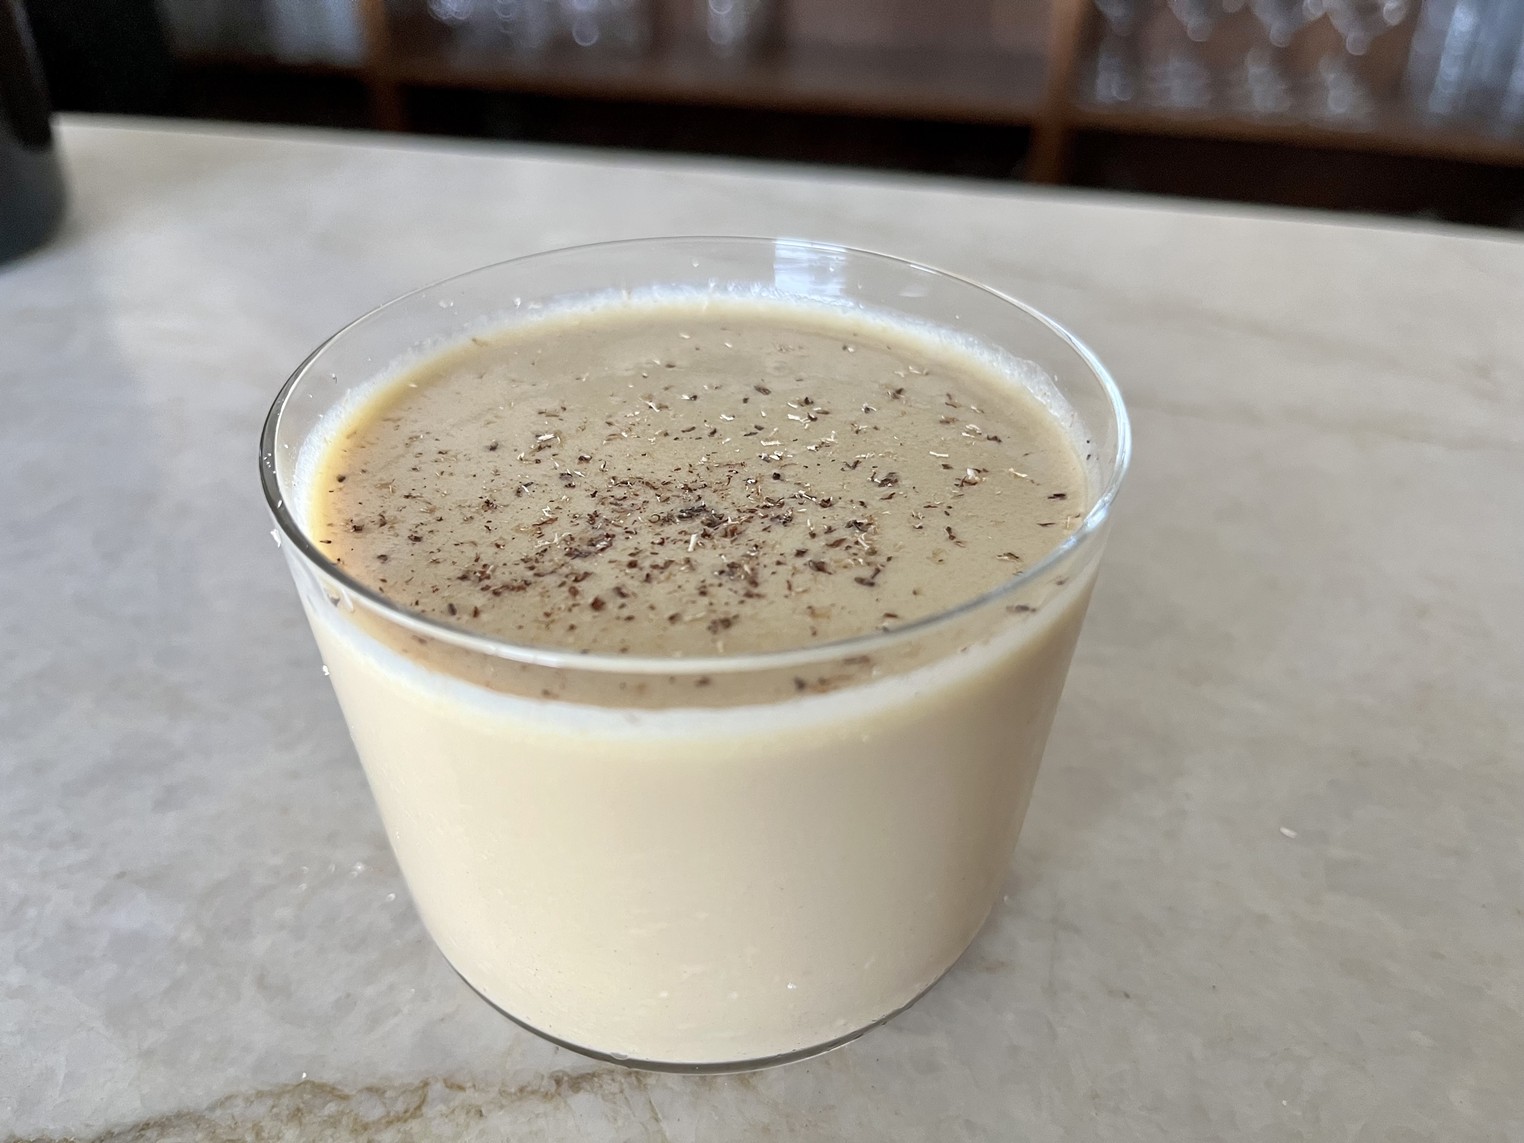   
																Best Bites: Get in the Spirit of the Season with This Luxurious Local Eggnog 
															 